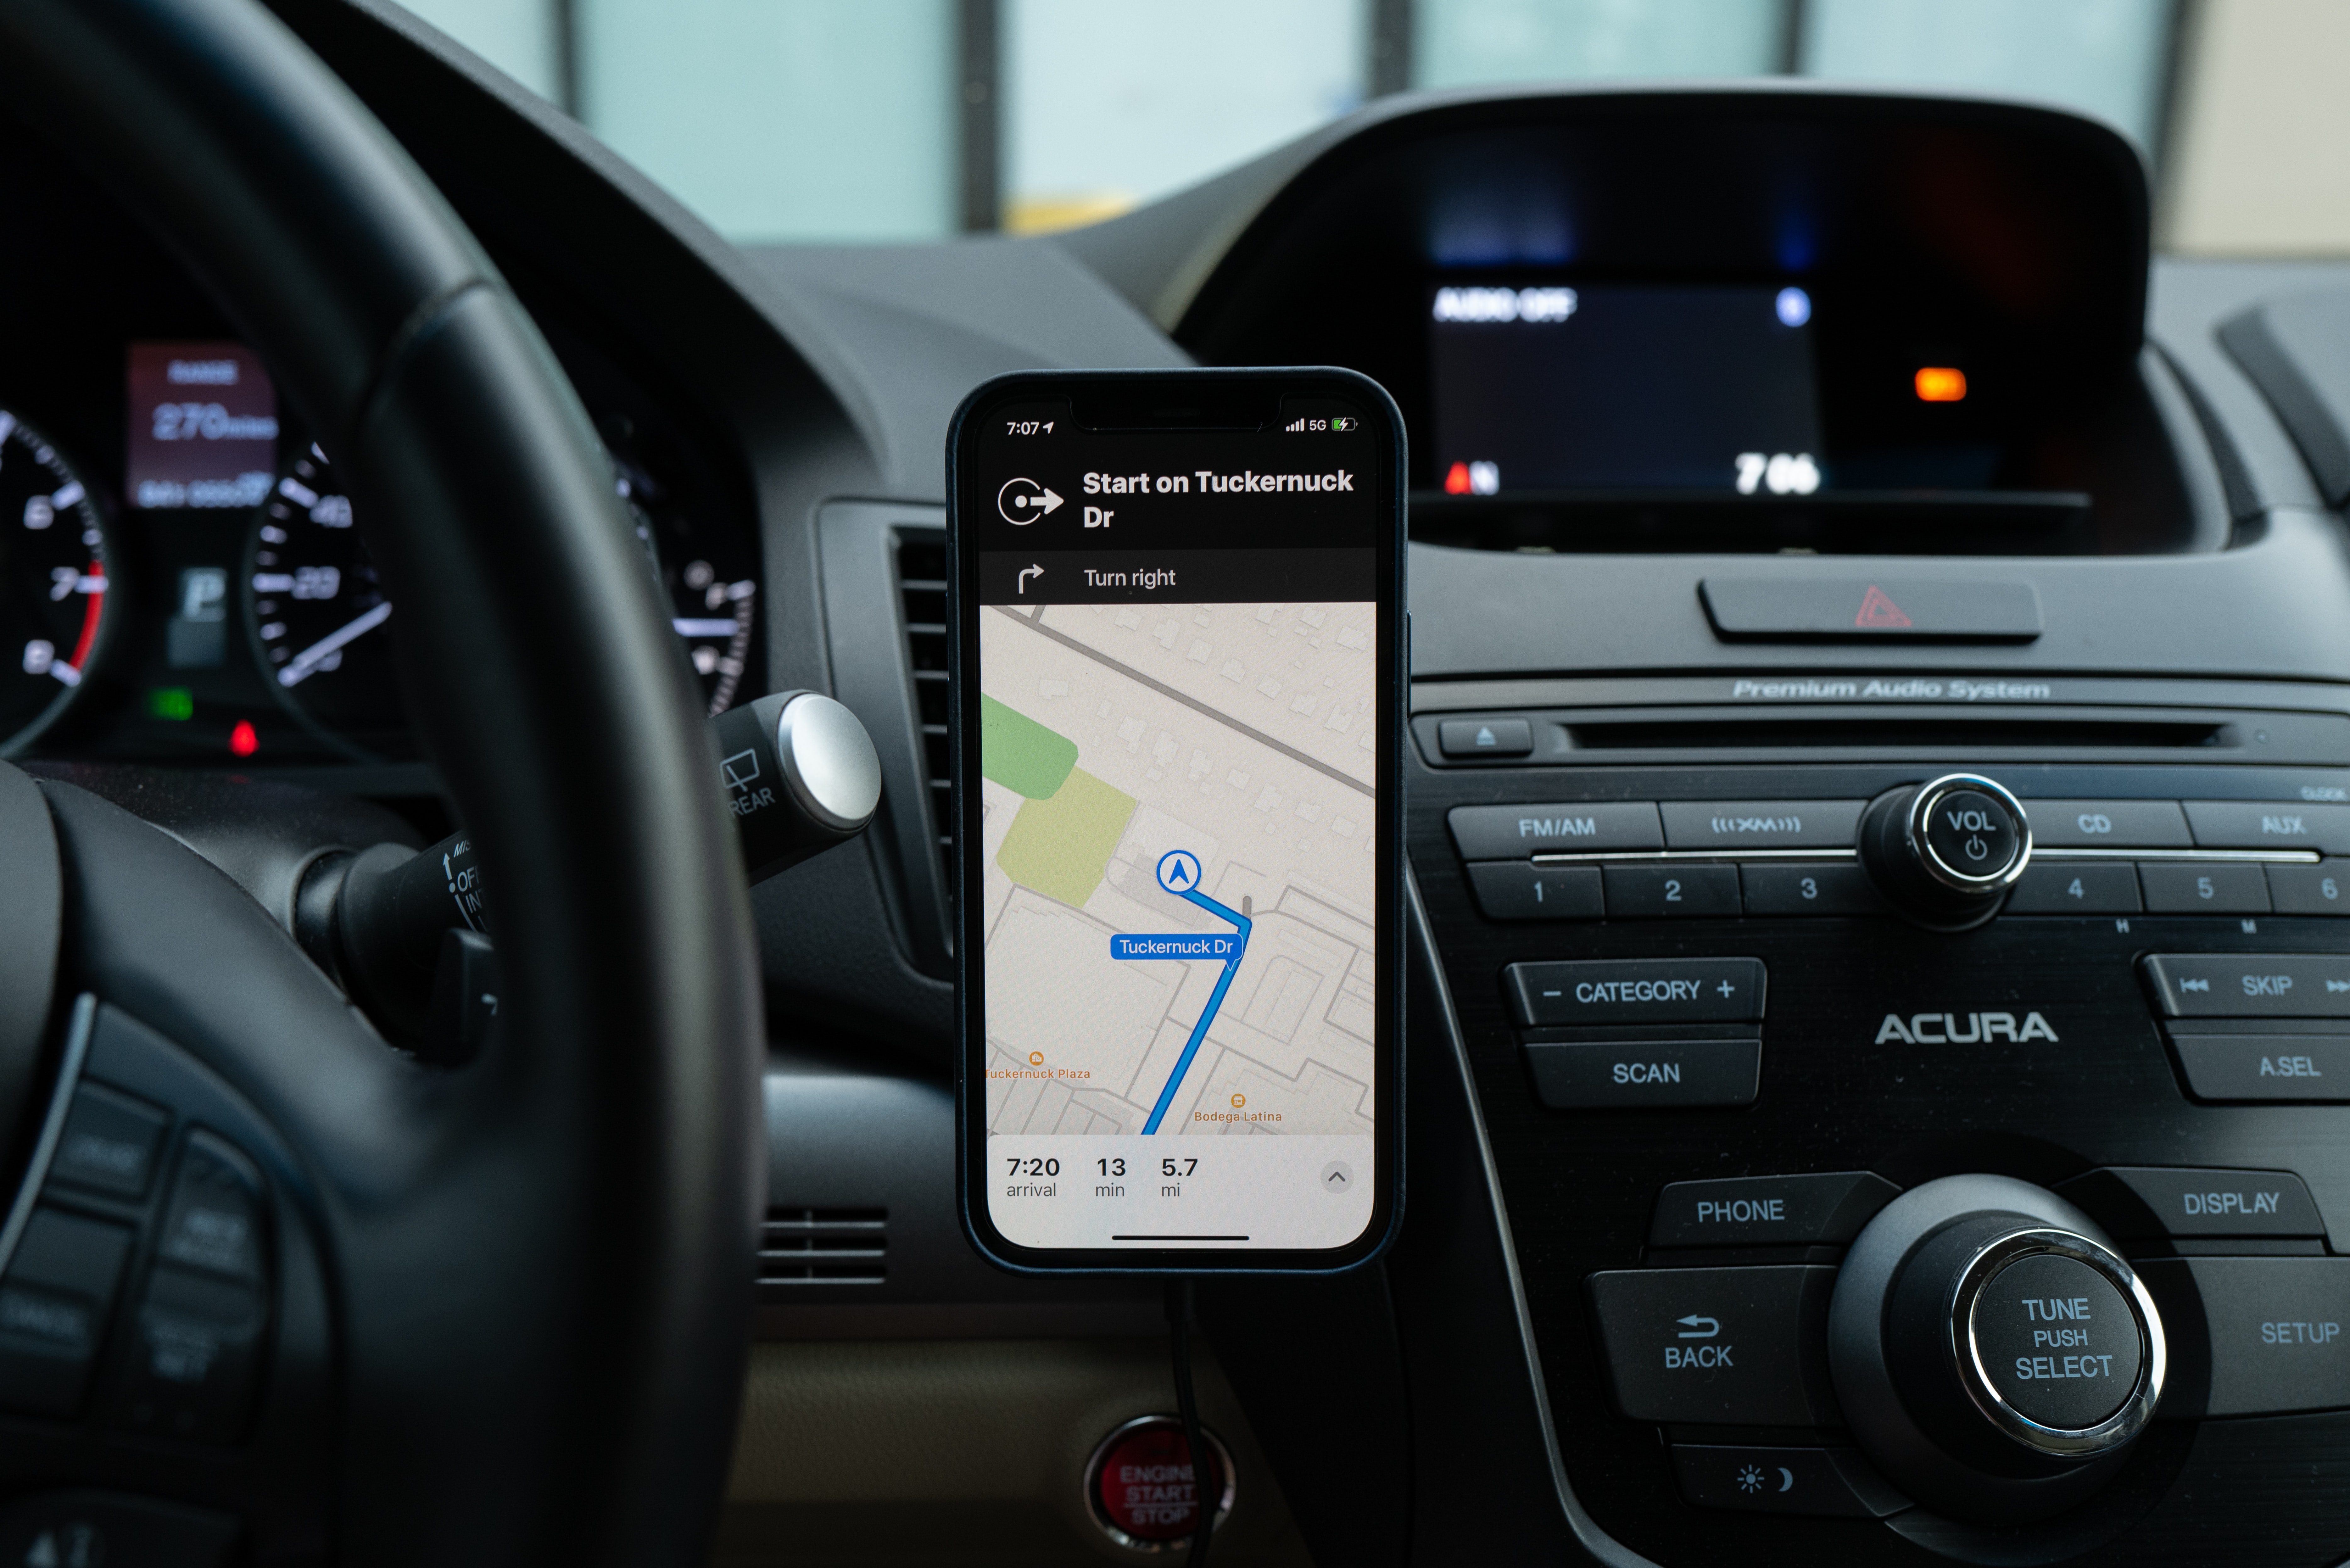 Are smartphone maps better than sat nav systems?